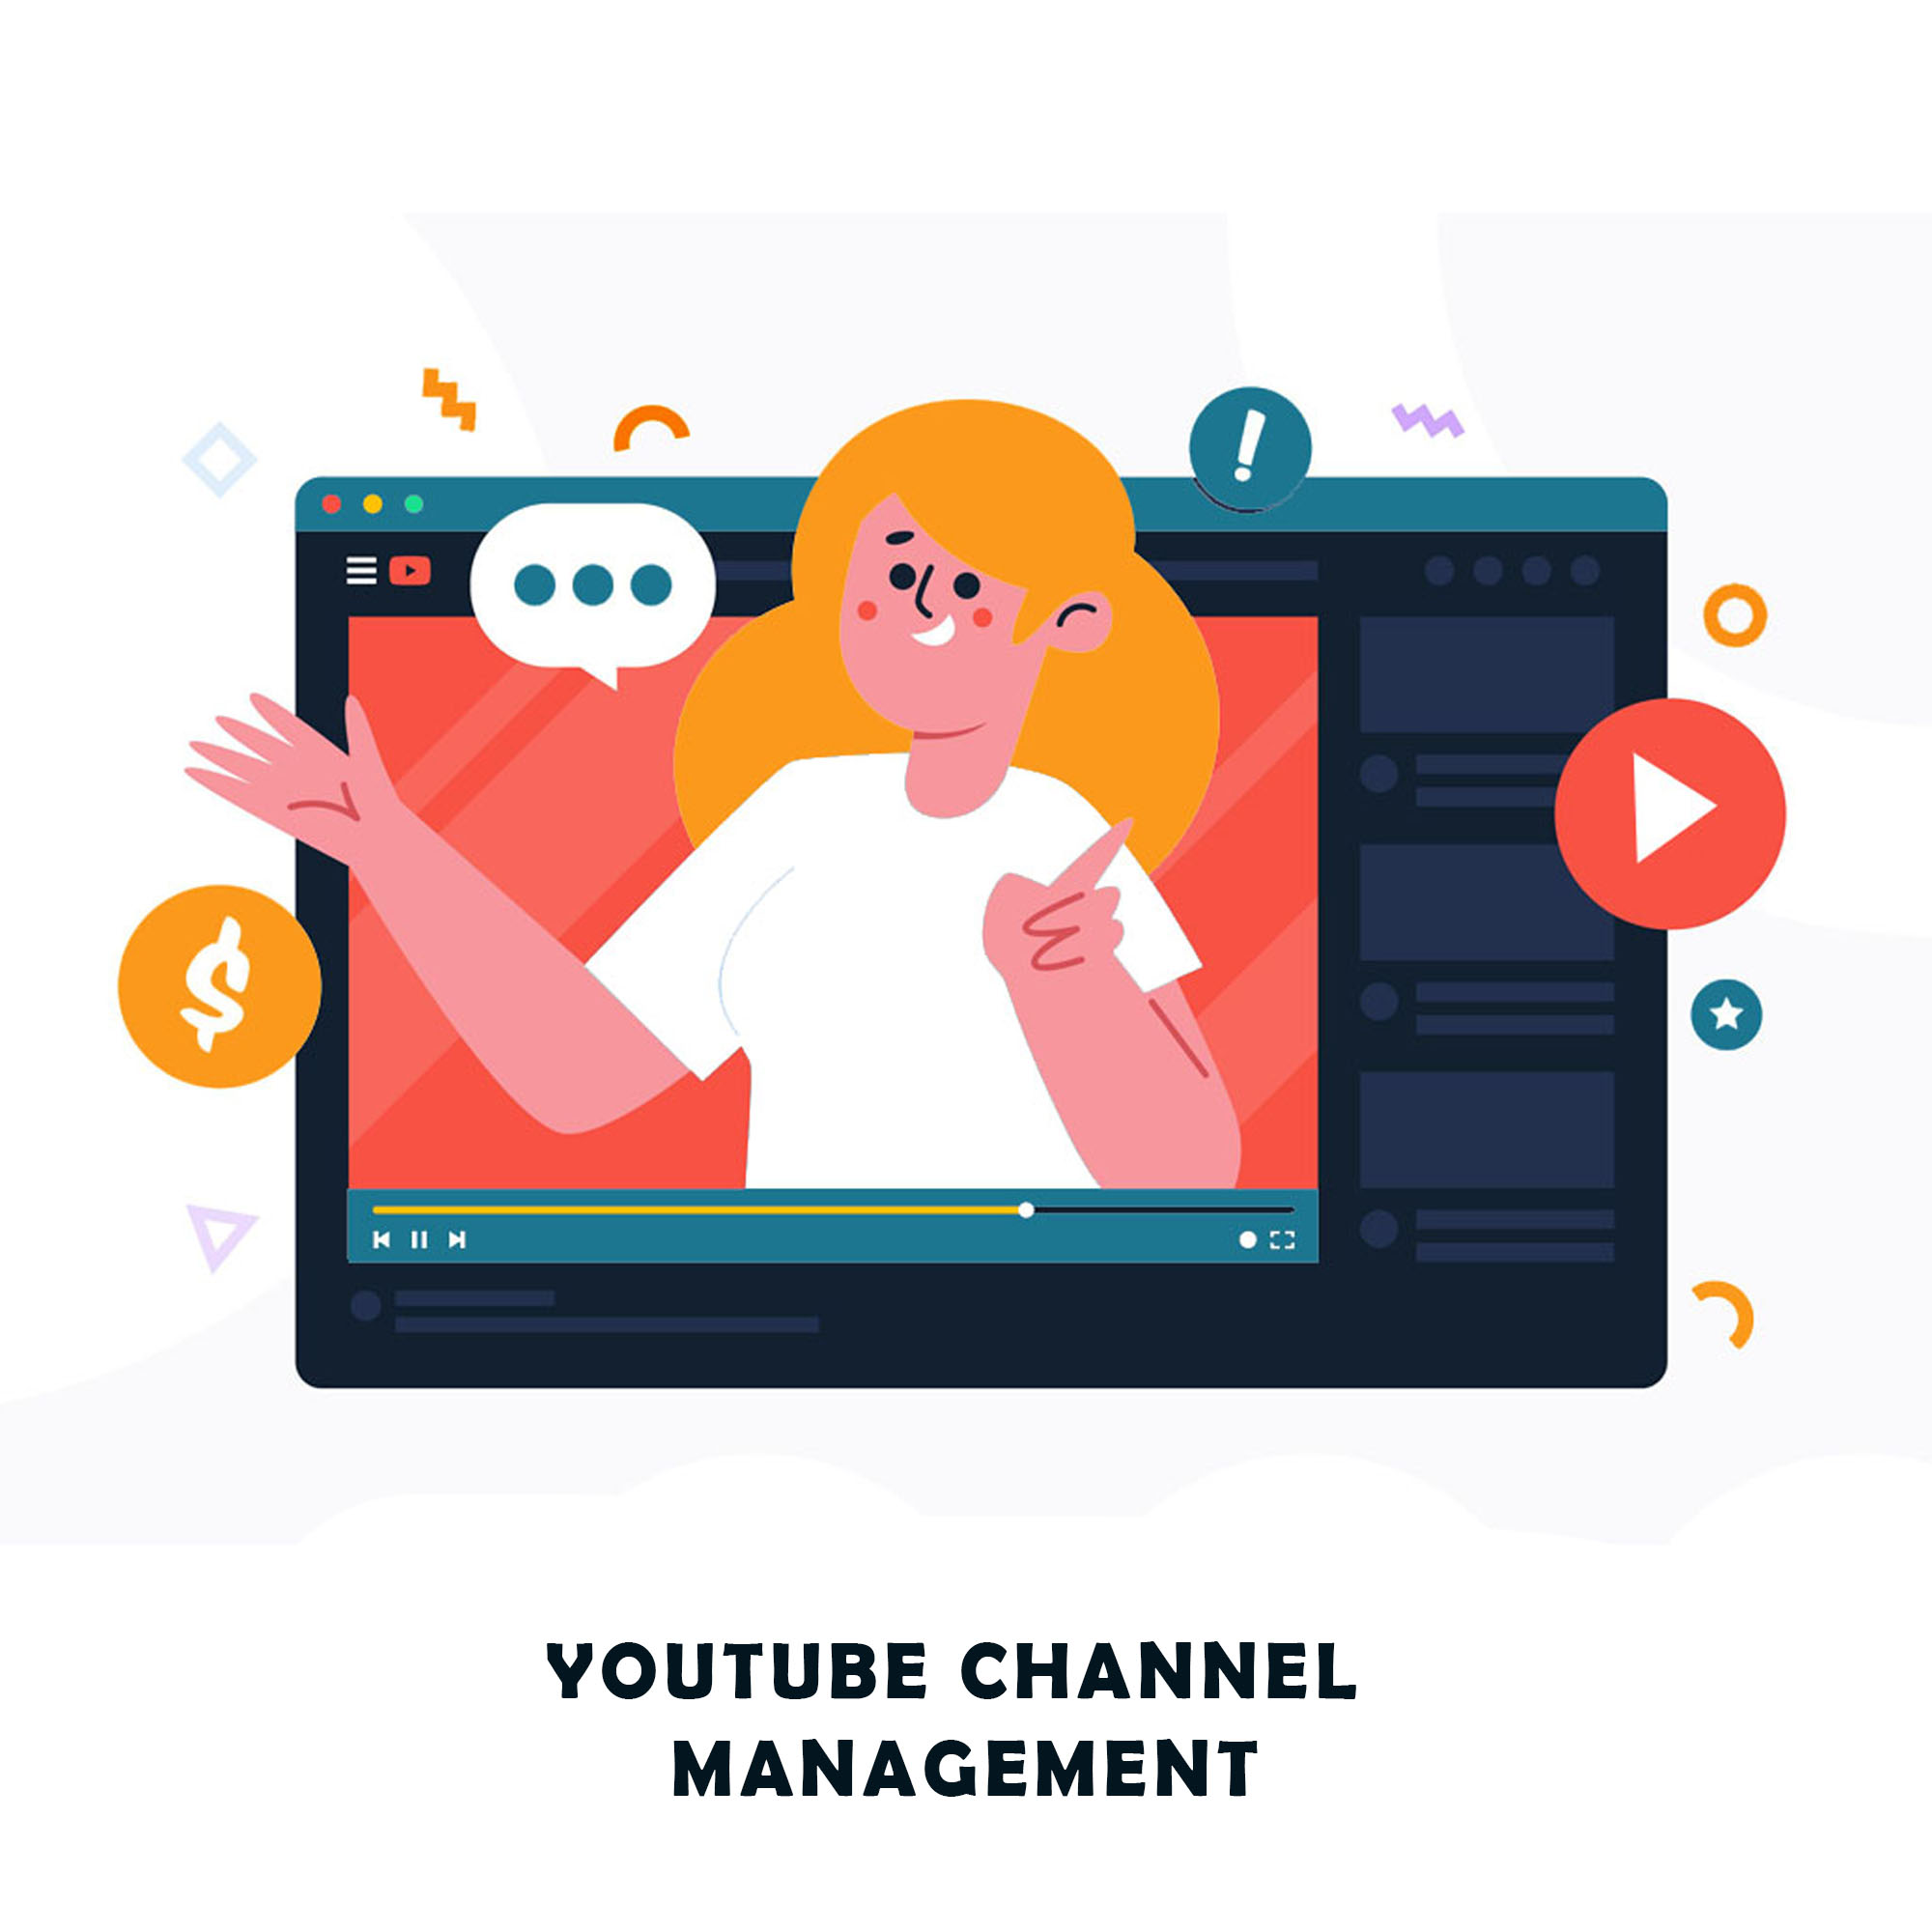 YOUTUBE CHANNEL MANAGEMENT